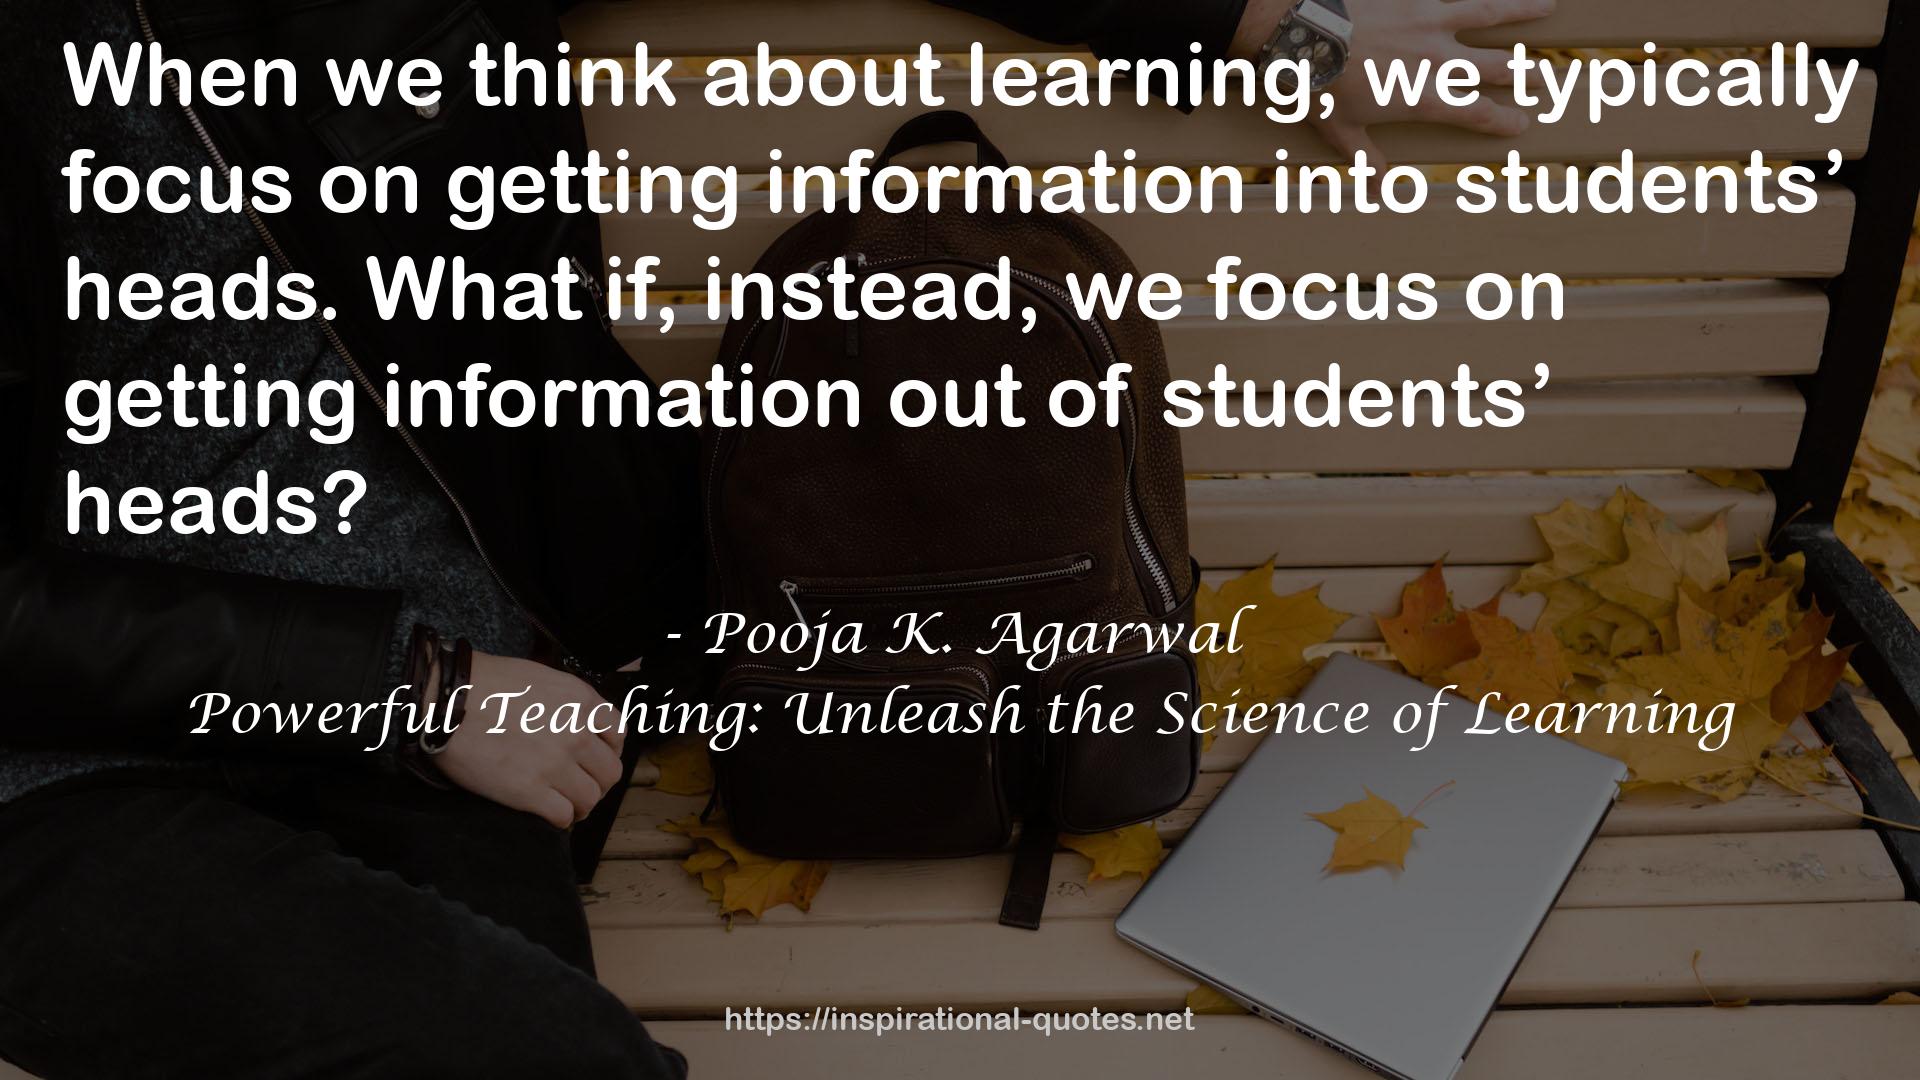 Powerful Teaching: Unleash the Science of Learning QUOTES